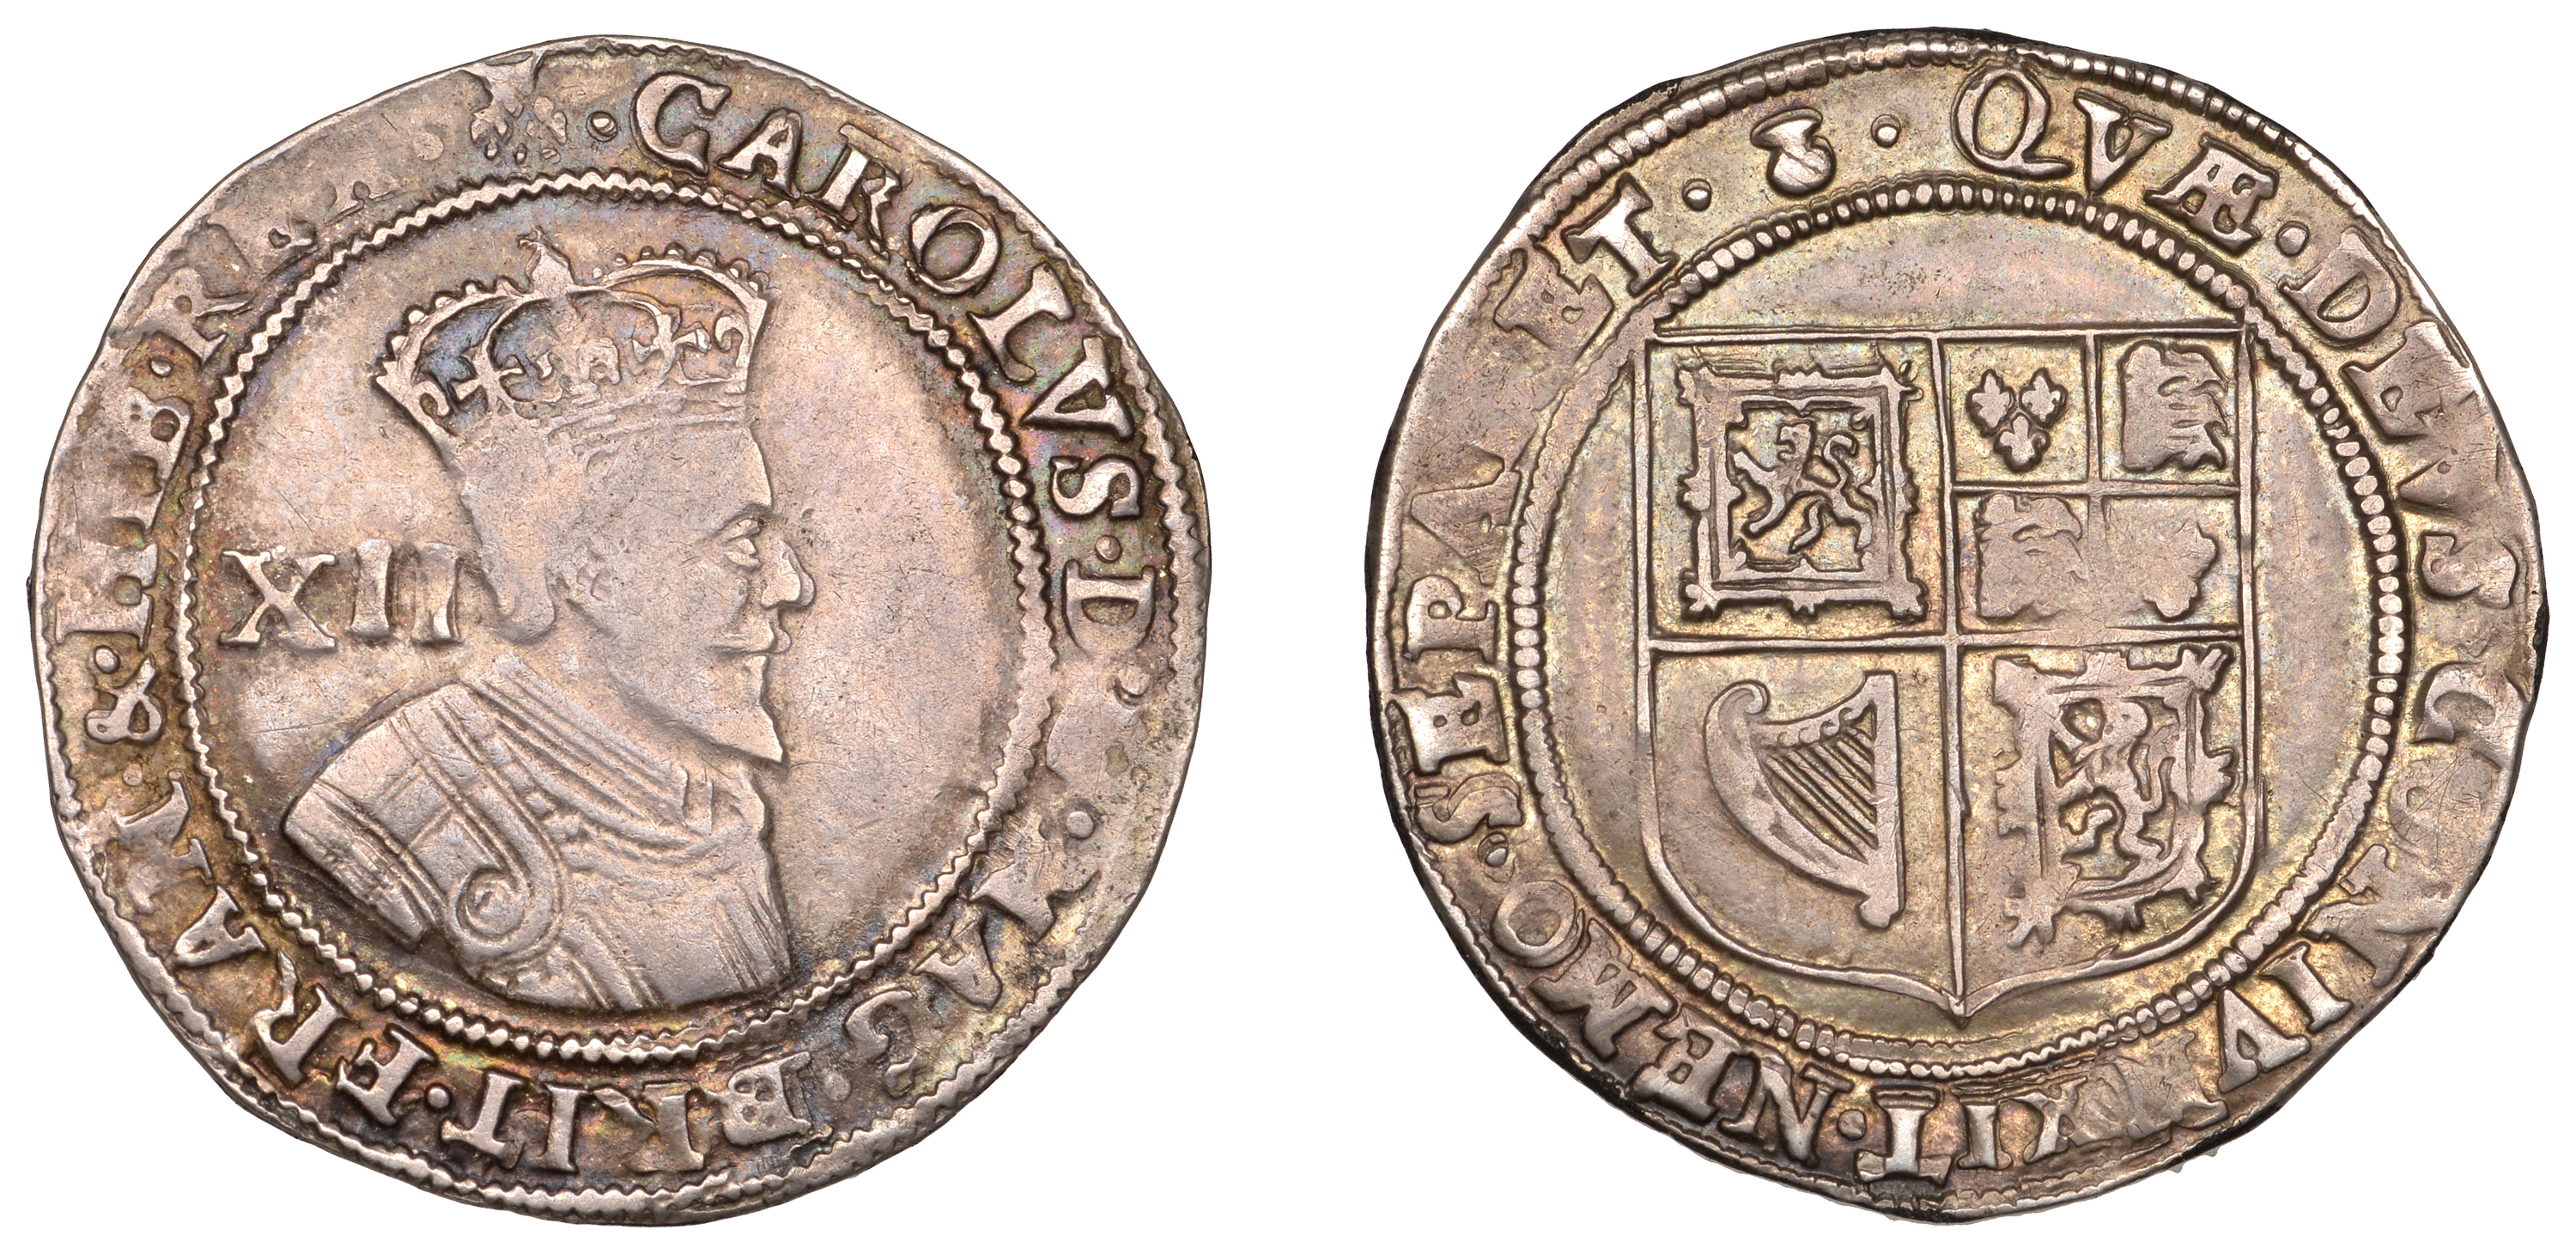 Charles I (1625-1649), First coinage, Twelve Shillings, mm. large thistle-head, reads fran &...